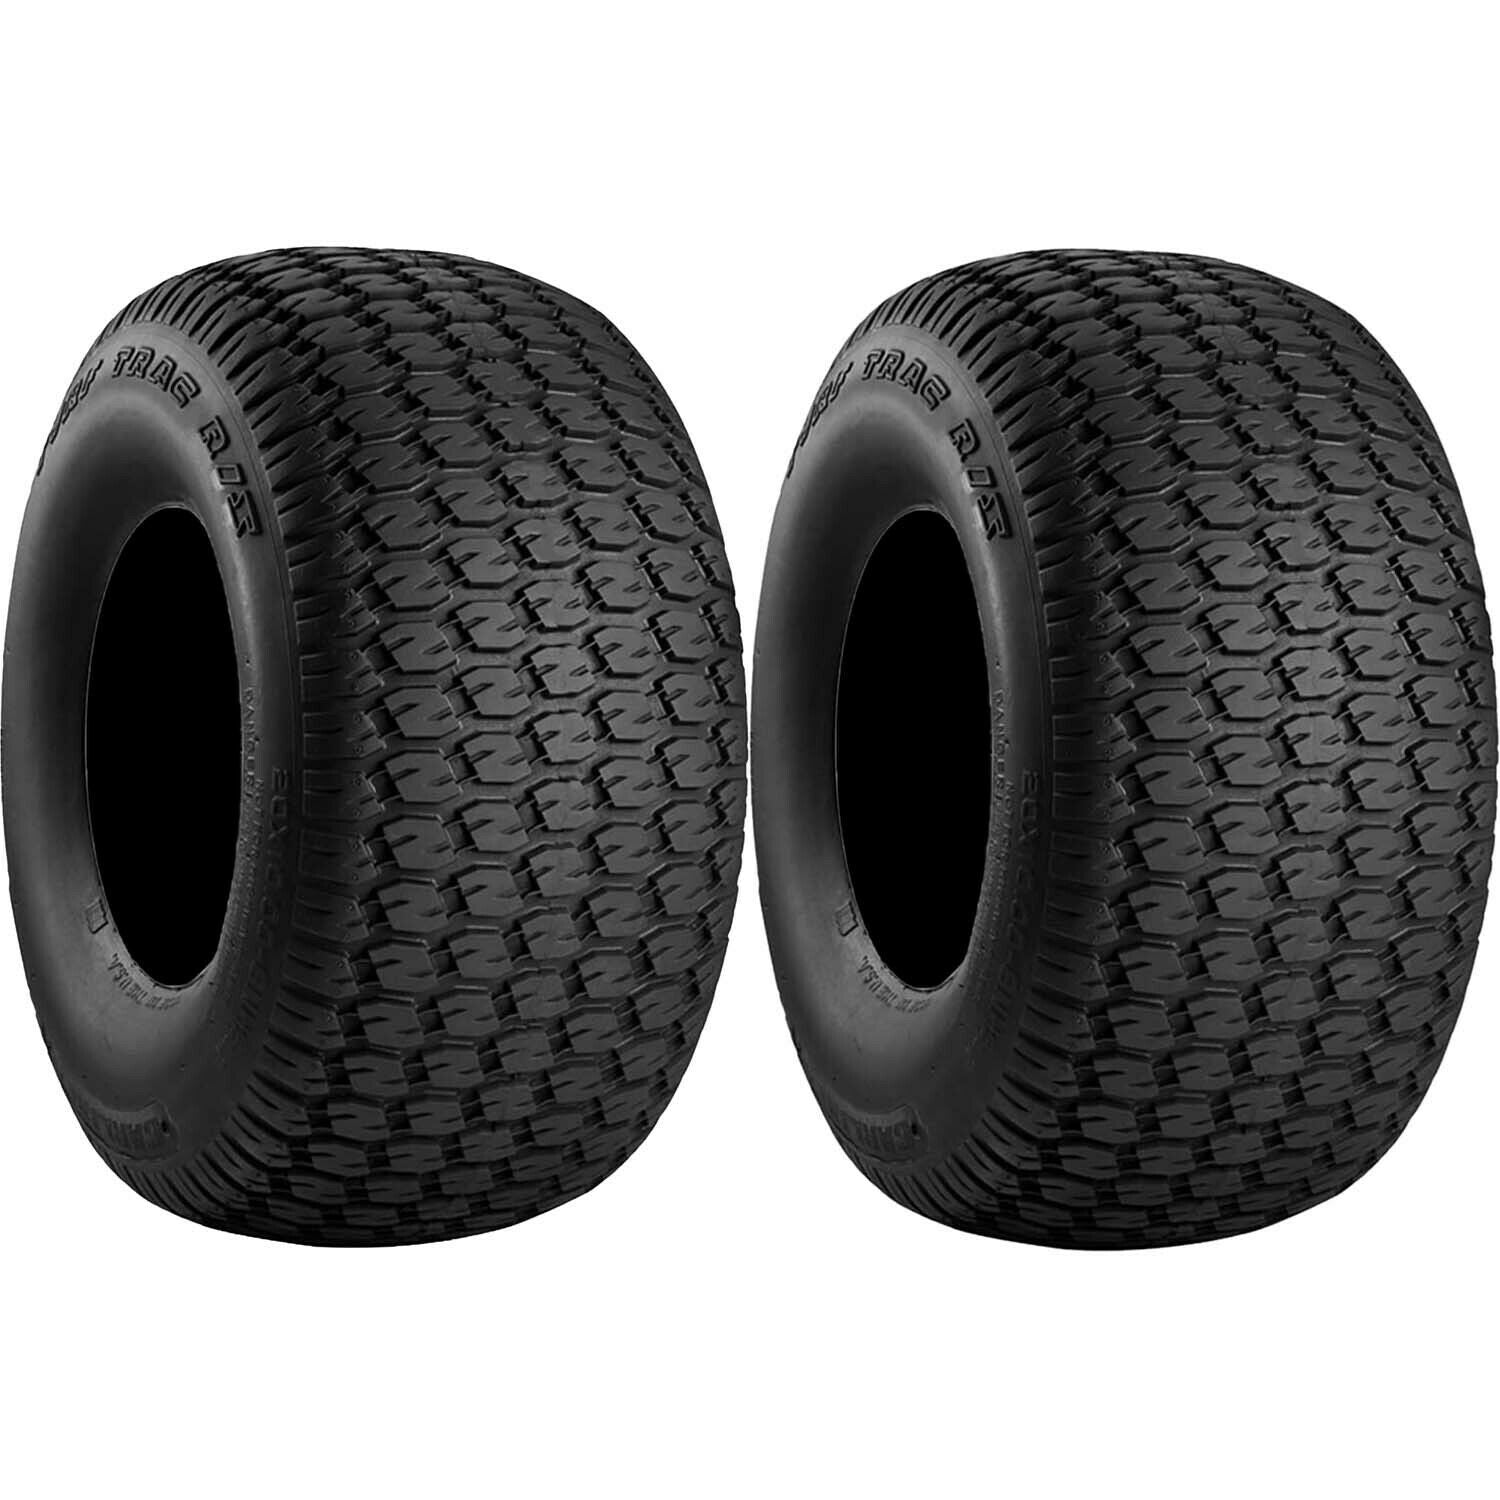 Carlisle Turf Trac R/S Lawn and Garden Tire 4Ply 24x9.50-10 Pack of 2